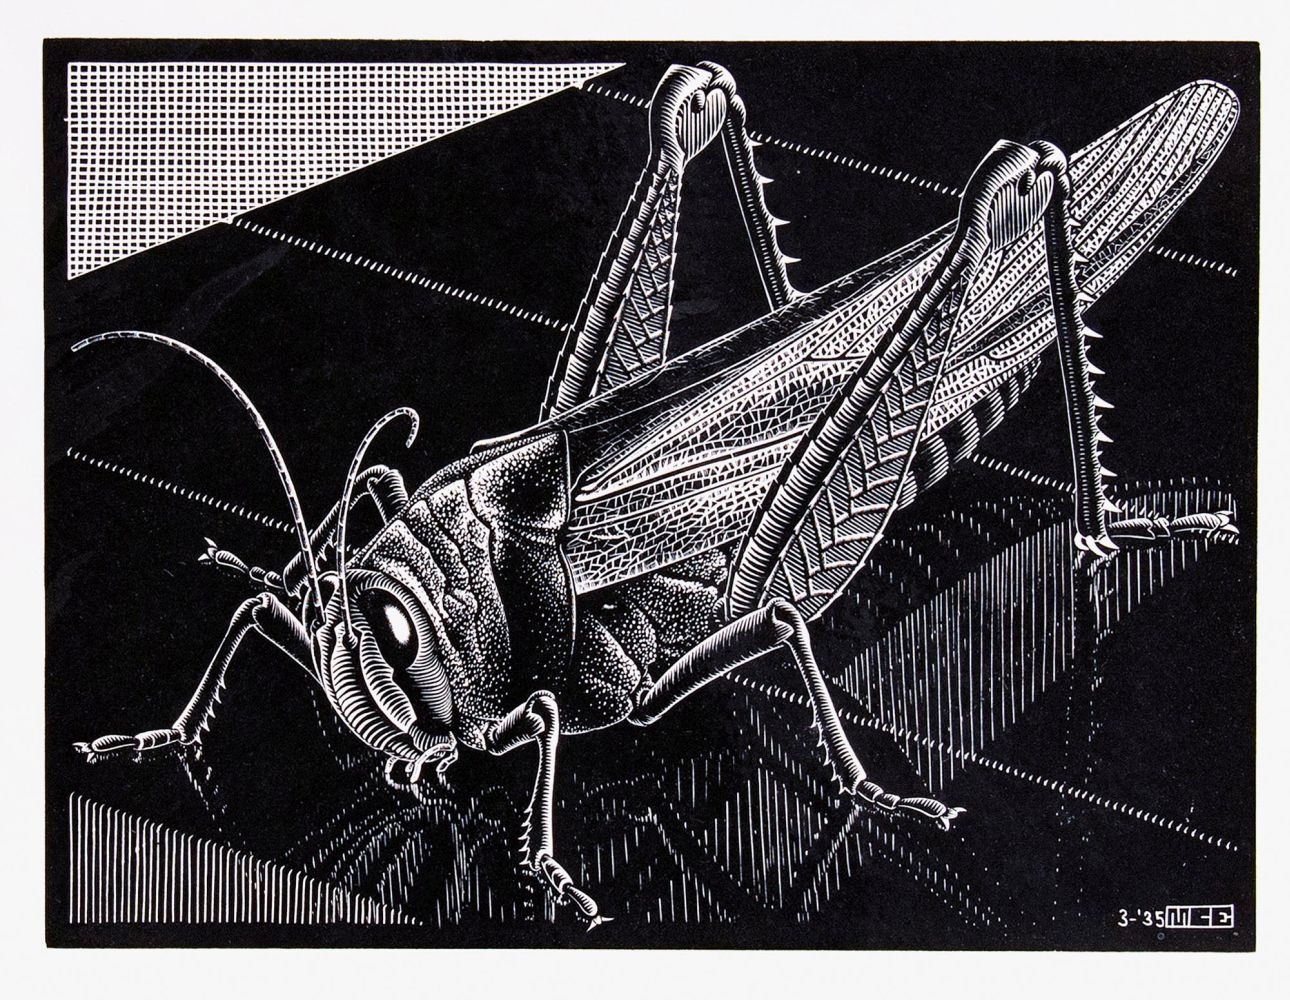 Six works: Scarabees; Grasshopper; Spinrag; title woodcut of De Graphicus M. C. Escher; Fishes and Frogs; Het bezwaarde hart by Maurits Cornelis Escher